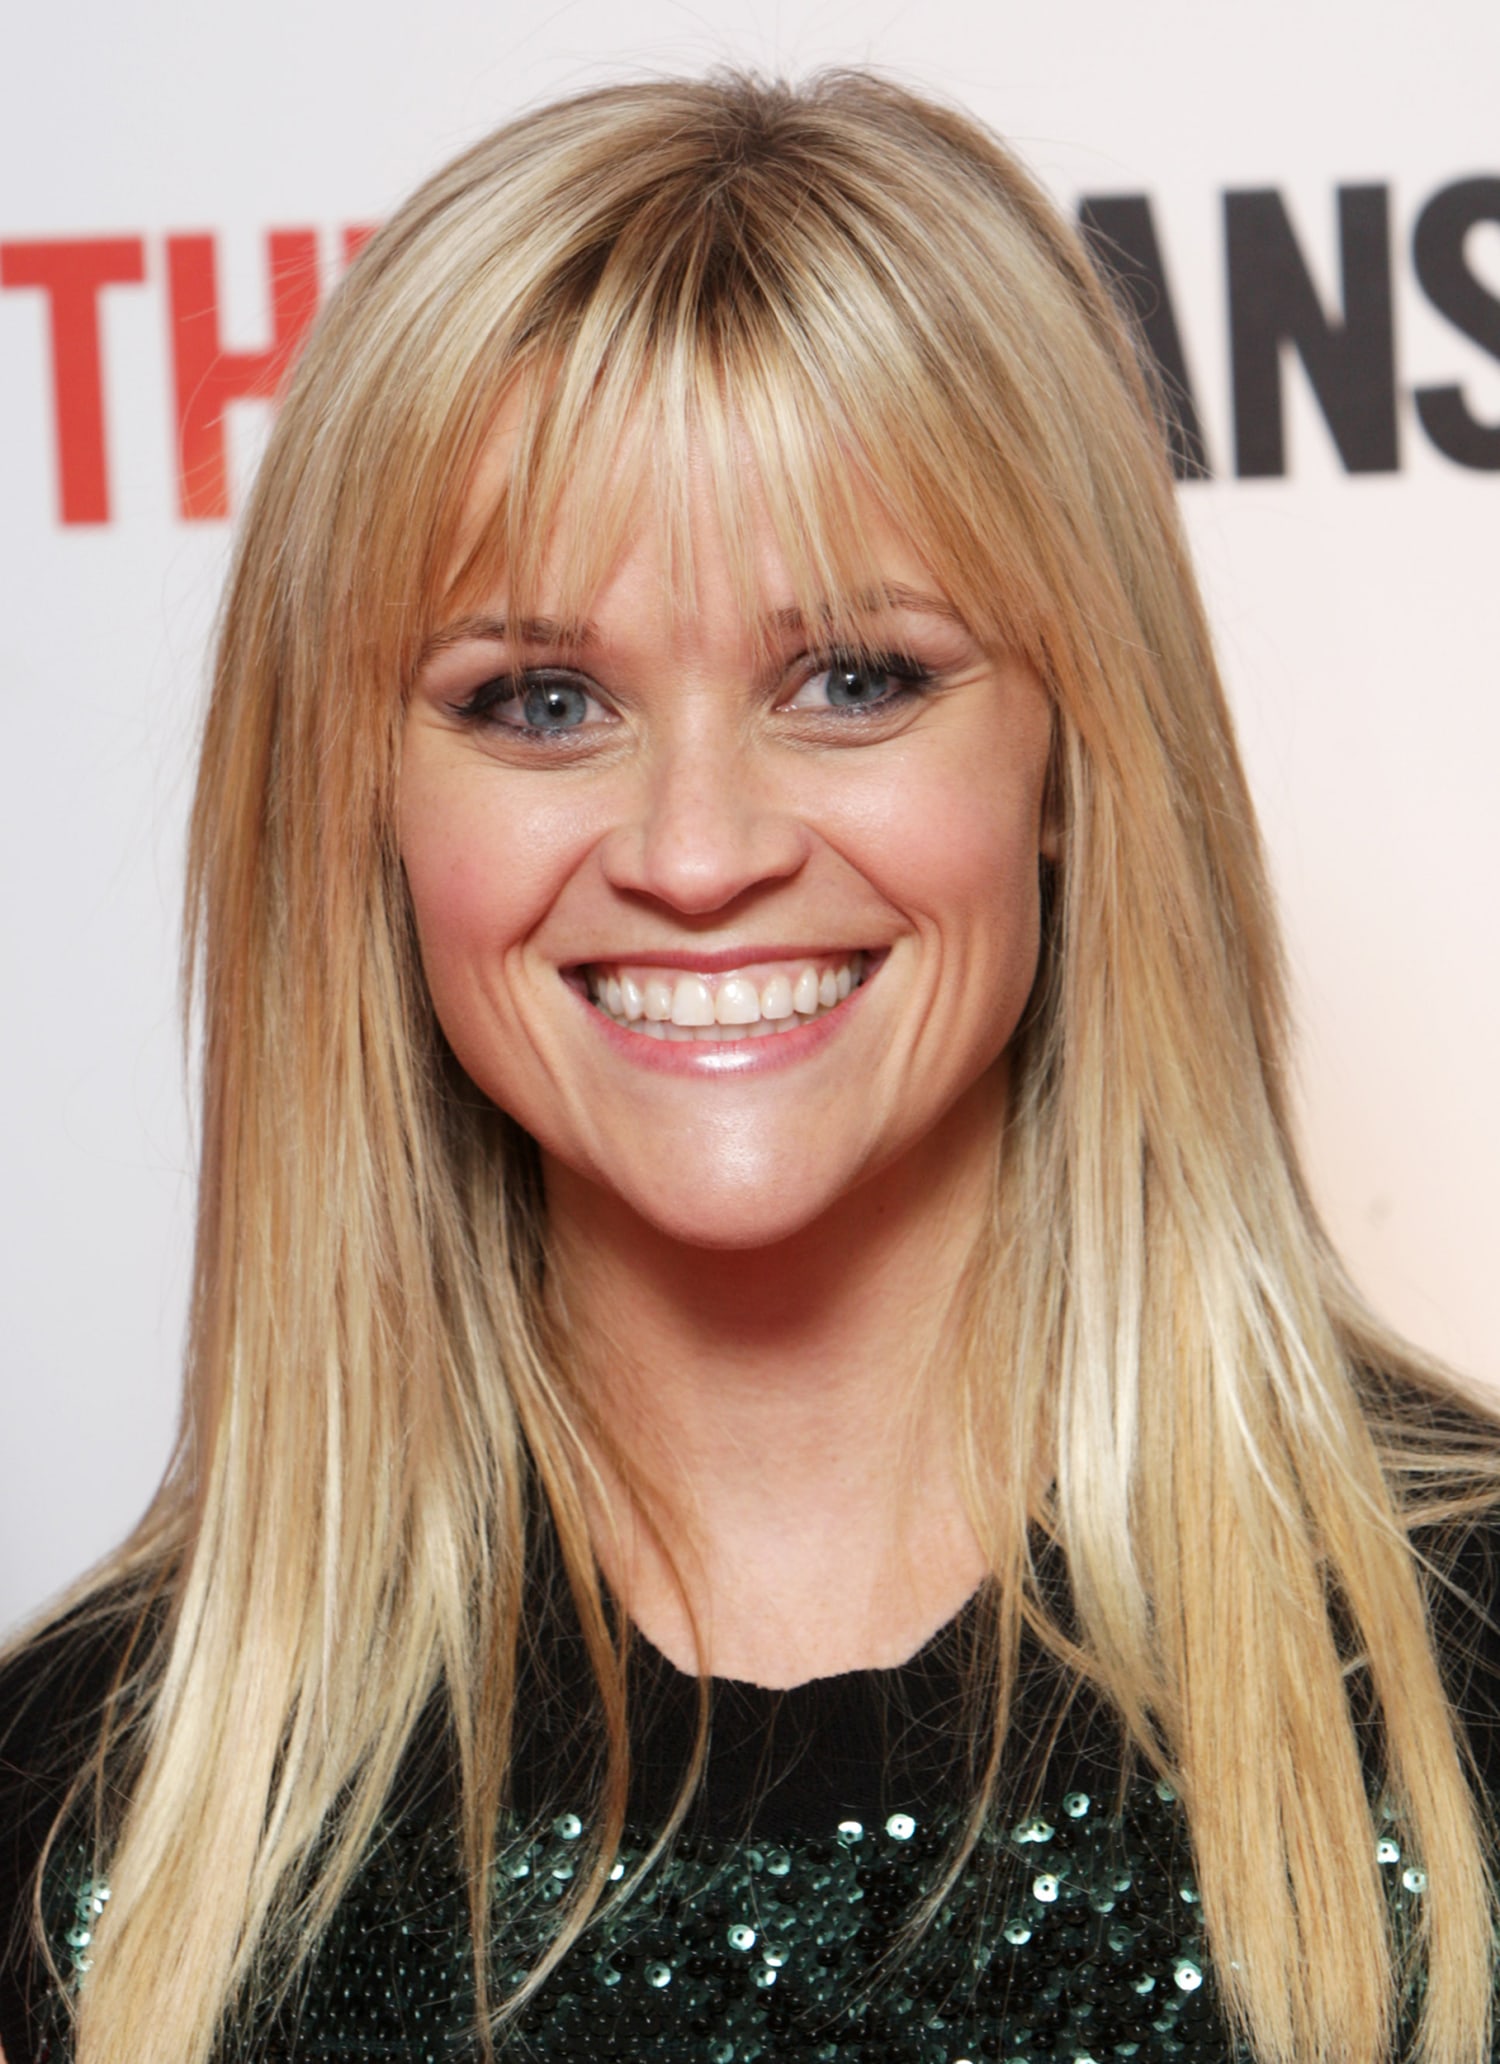 Reese Witherspoon's hair evolution